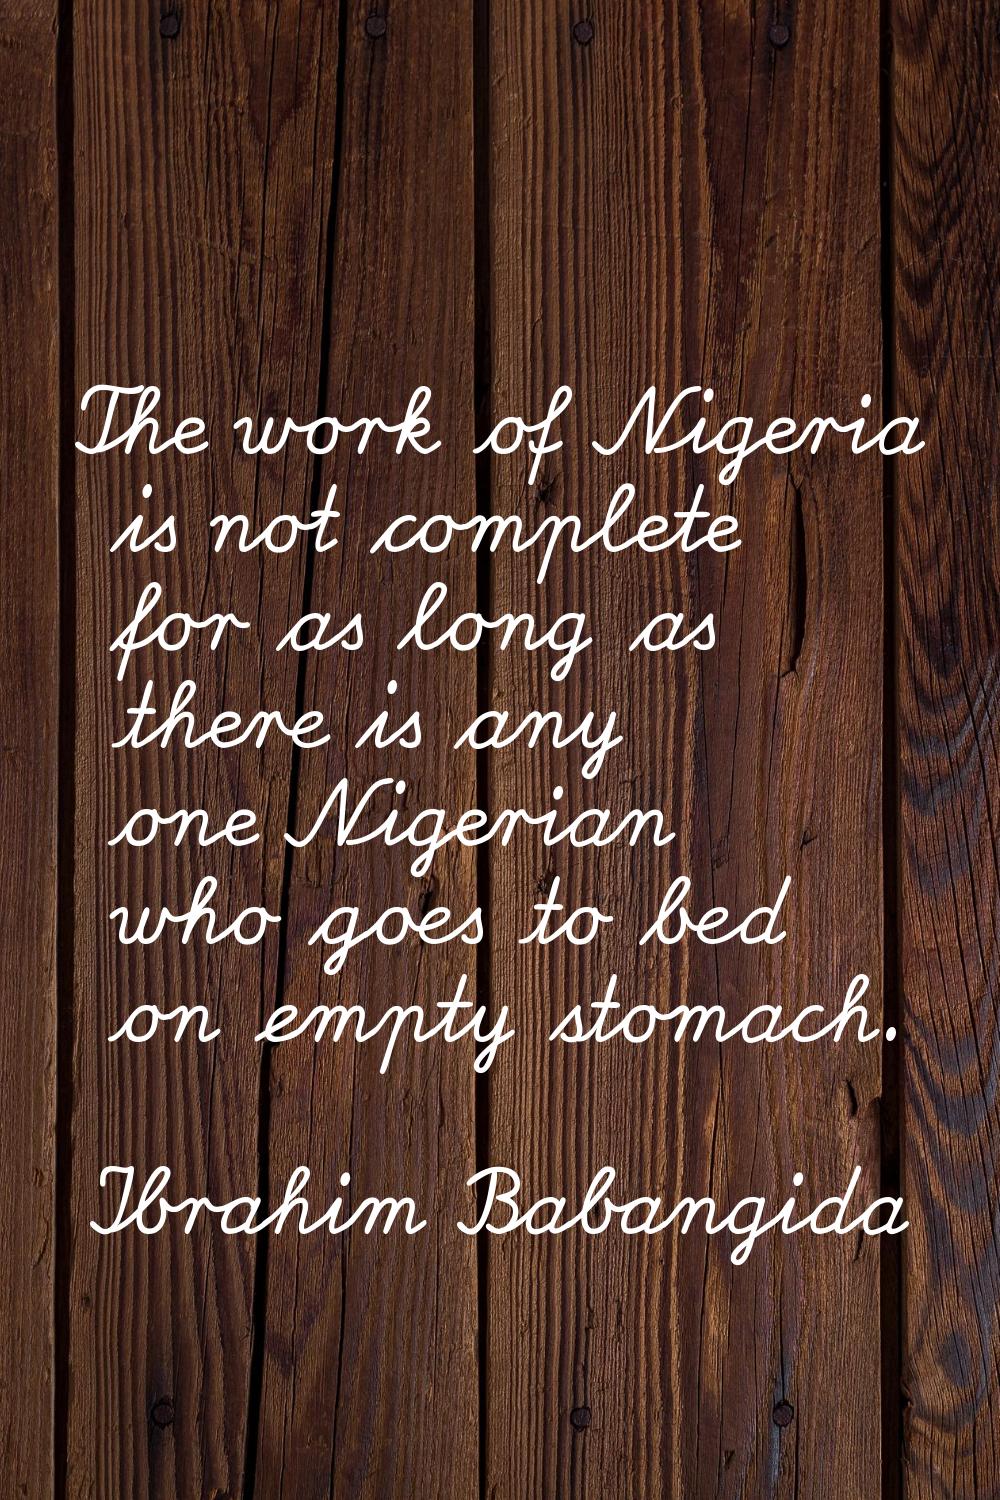 The work of Nigeria is not complete for as long as there is any one Nigerian who goes to bed on emp